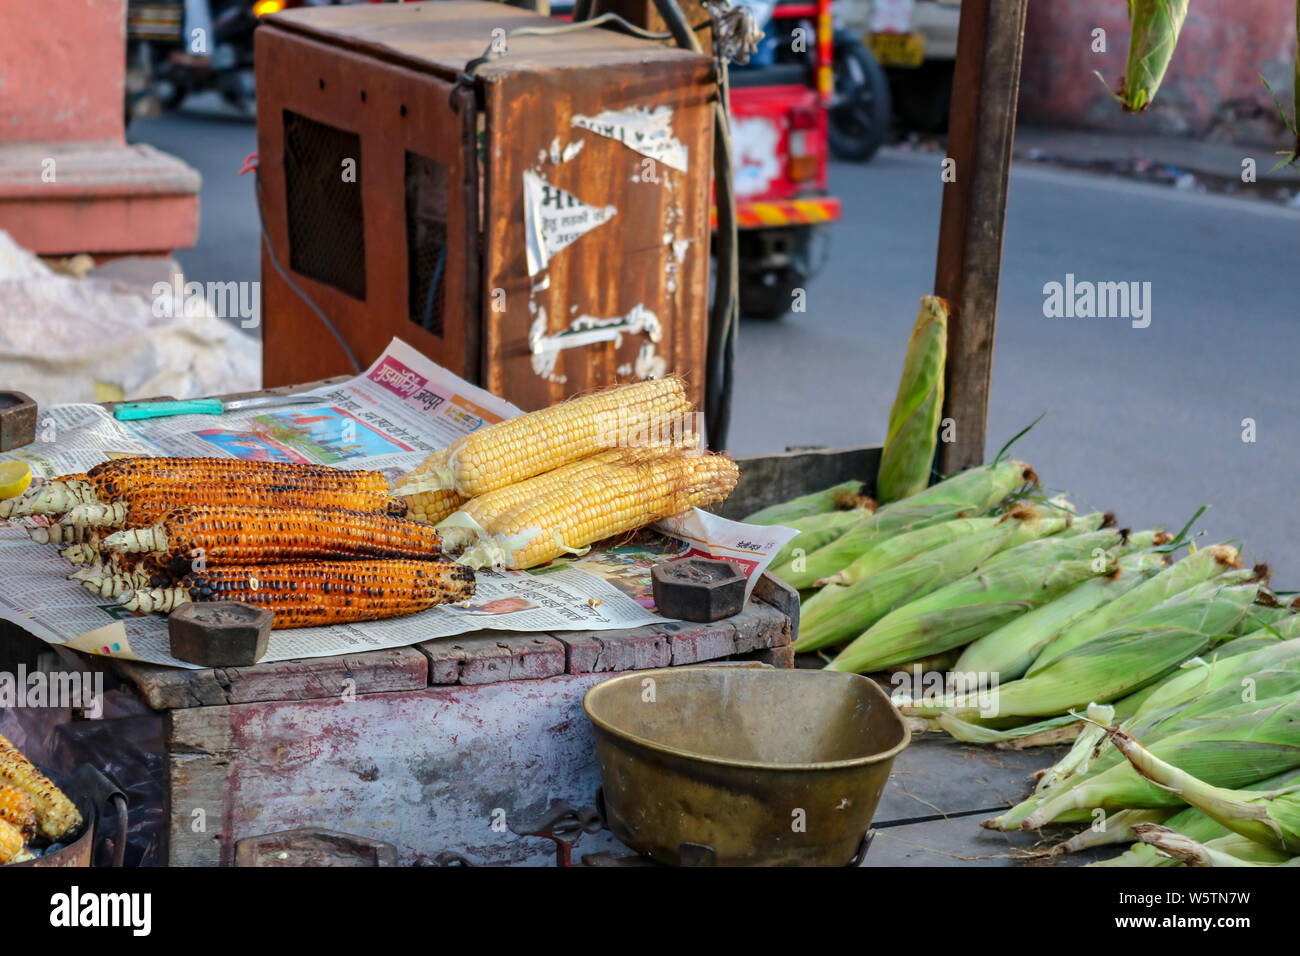 Grilled corn cobs at a kiosk of a street vendor in Jaipur, India Stock Photo